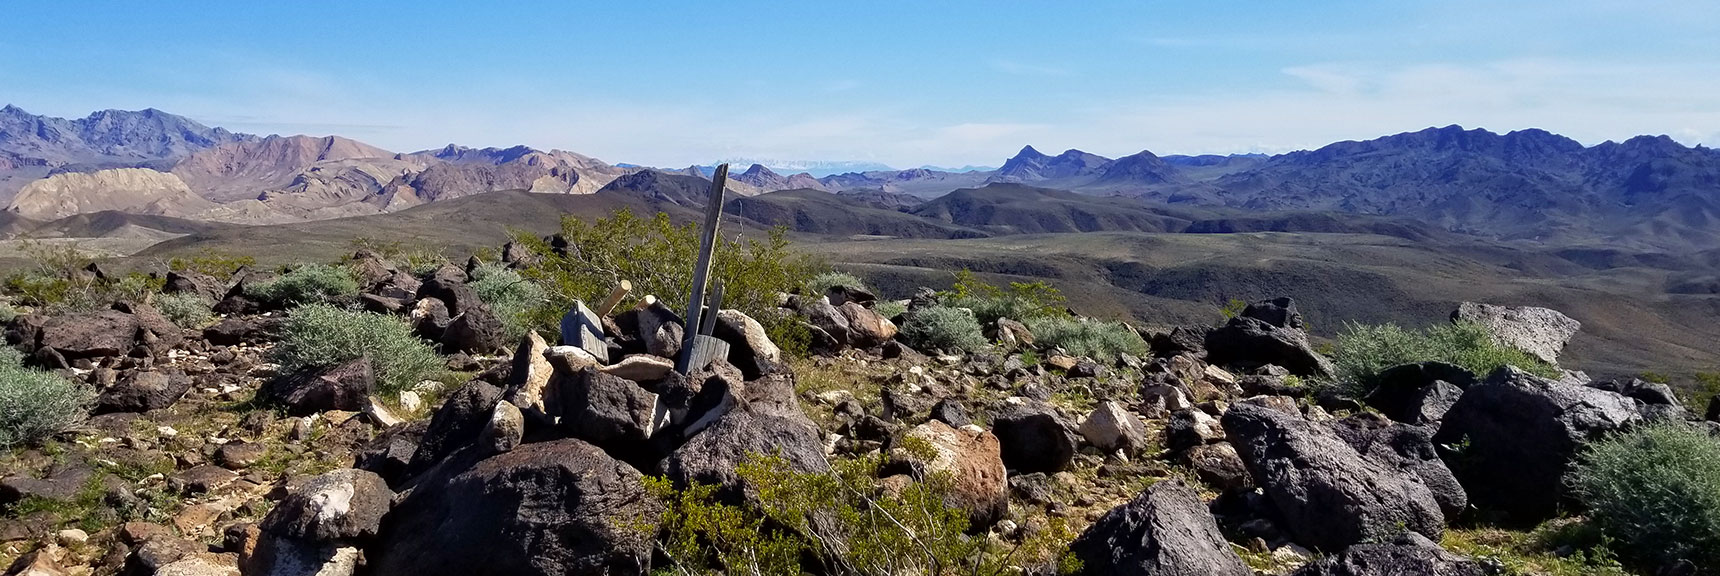 View Toward Jimbilnan Wilderness and Muddy Mountains from Black Mesa in Lake Mead National Recreation Area, Nevada